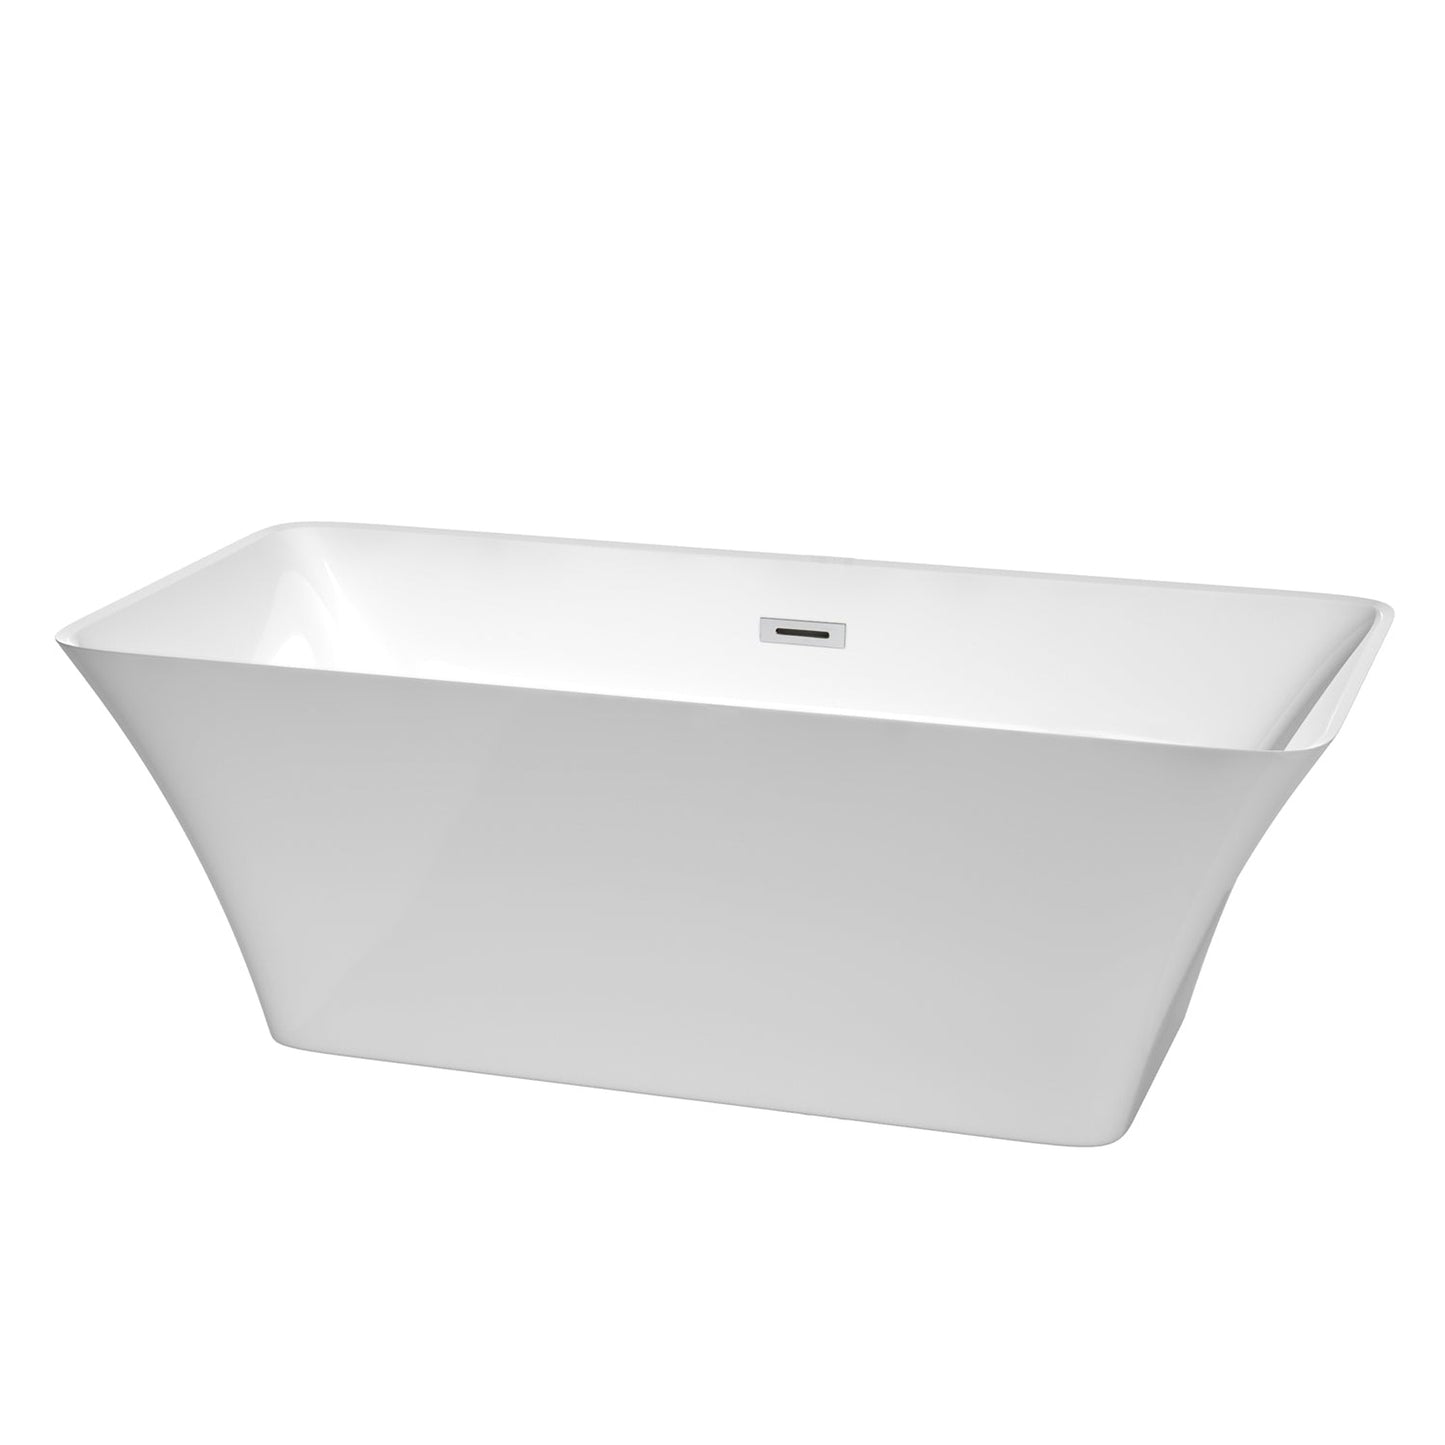 Wyndham Collection Tiffany 67" Freestanding Bathtub in White With Polished Chrome Drain and Overflow Trim